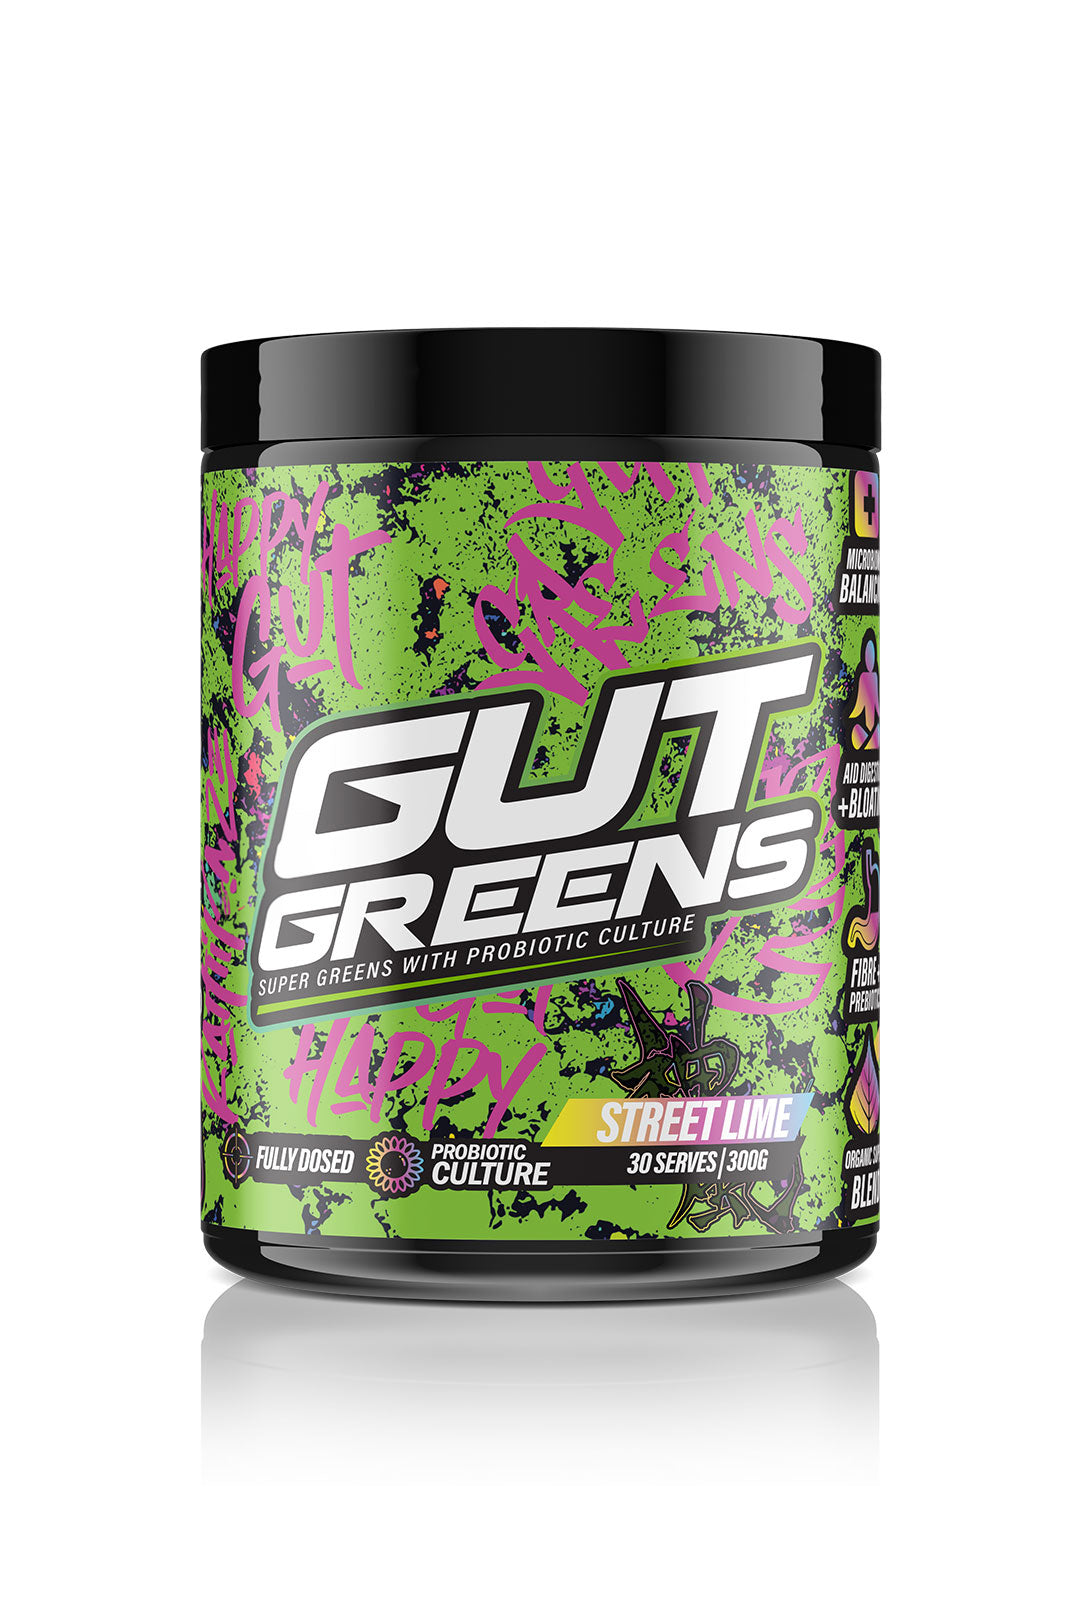 greens powder for gut health in street lime flavour